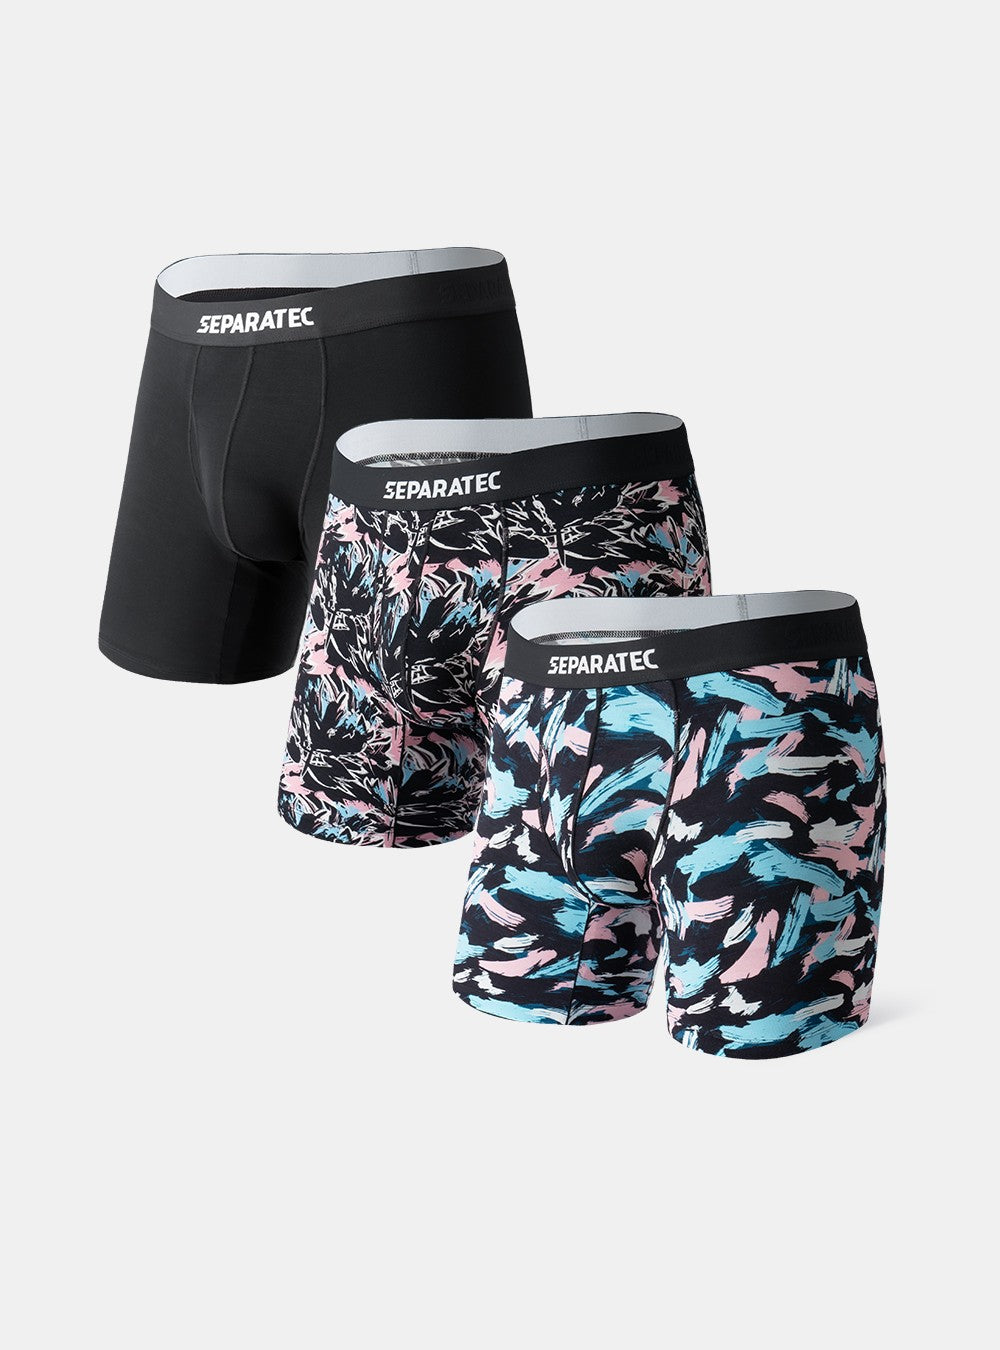 Blossom Prints 3D Single Ball Pouch Bamboo Rayon Boxer Briefs 3 Pack -  Separatec